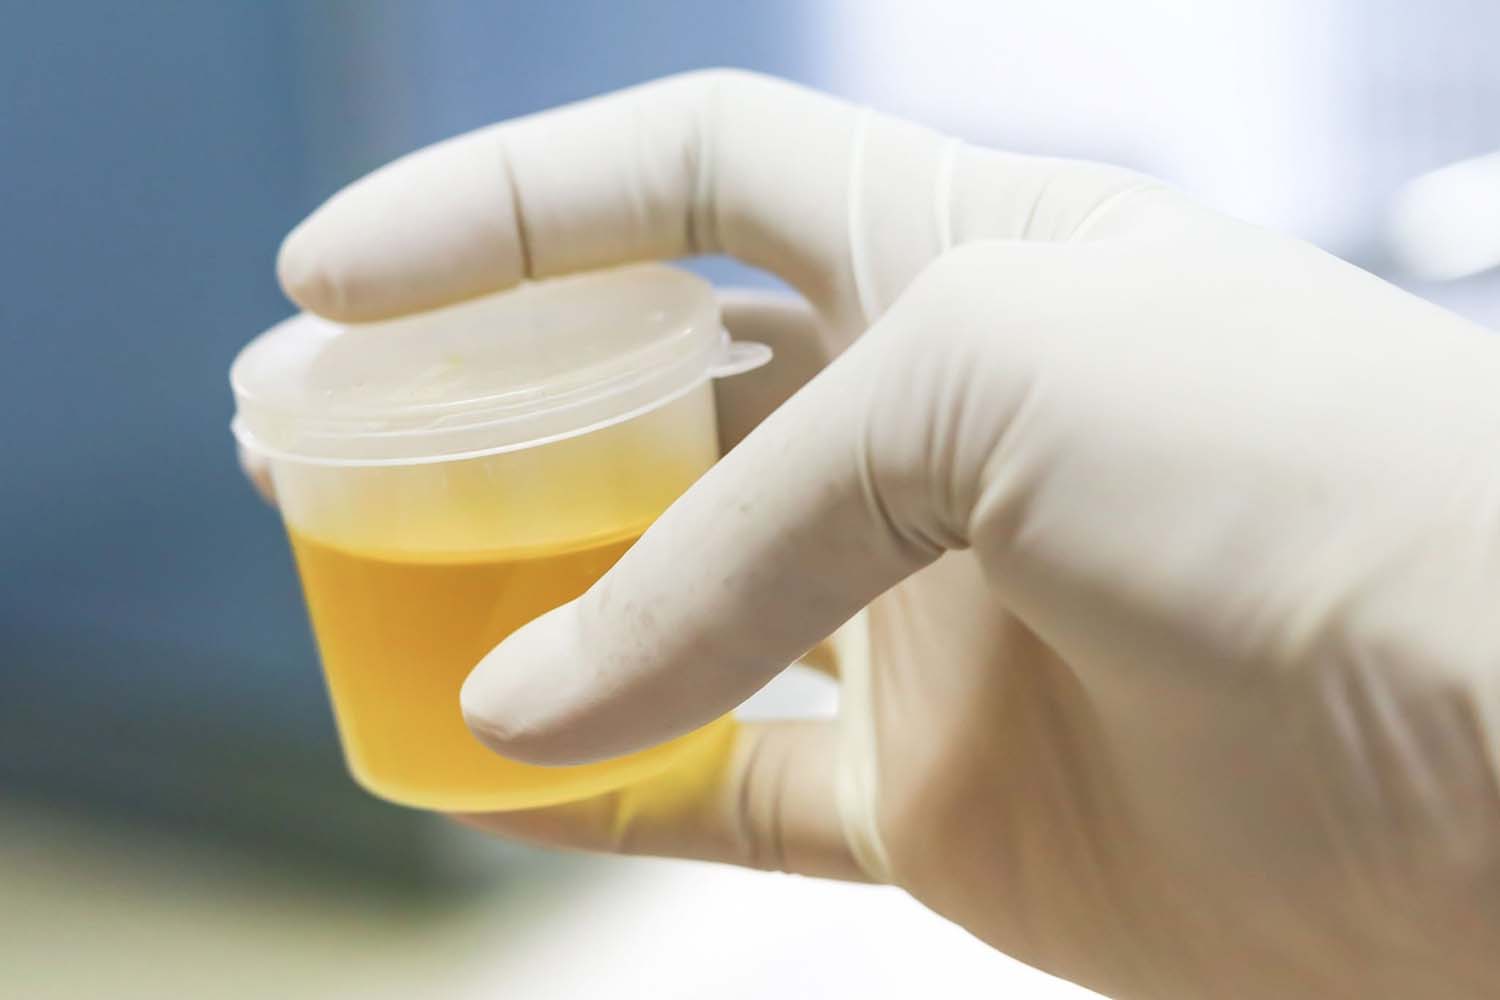 Best Synthetic Urine Kits: Top 5 Fake Pee Brands To Pass a Drug Test